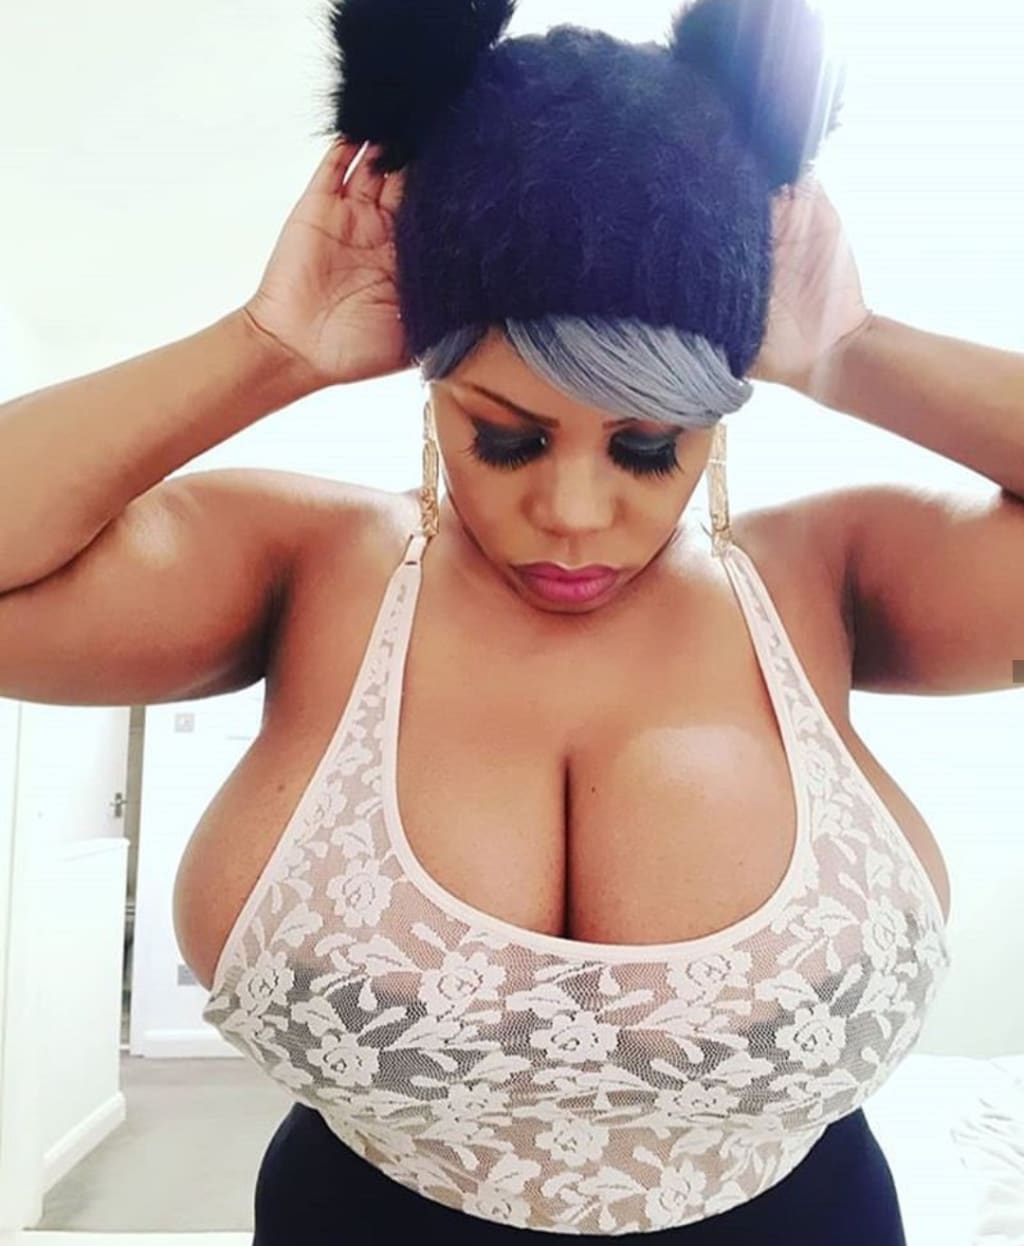 charlene matte recommends Huge Sexy Black Boobs